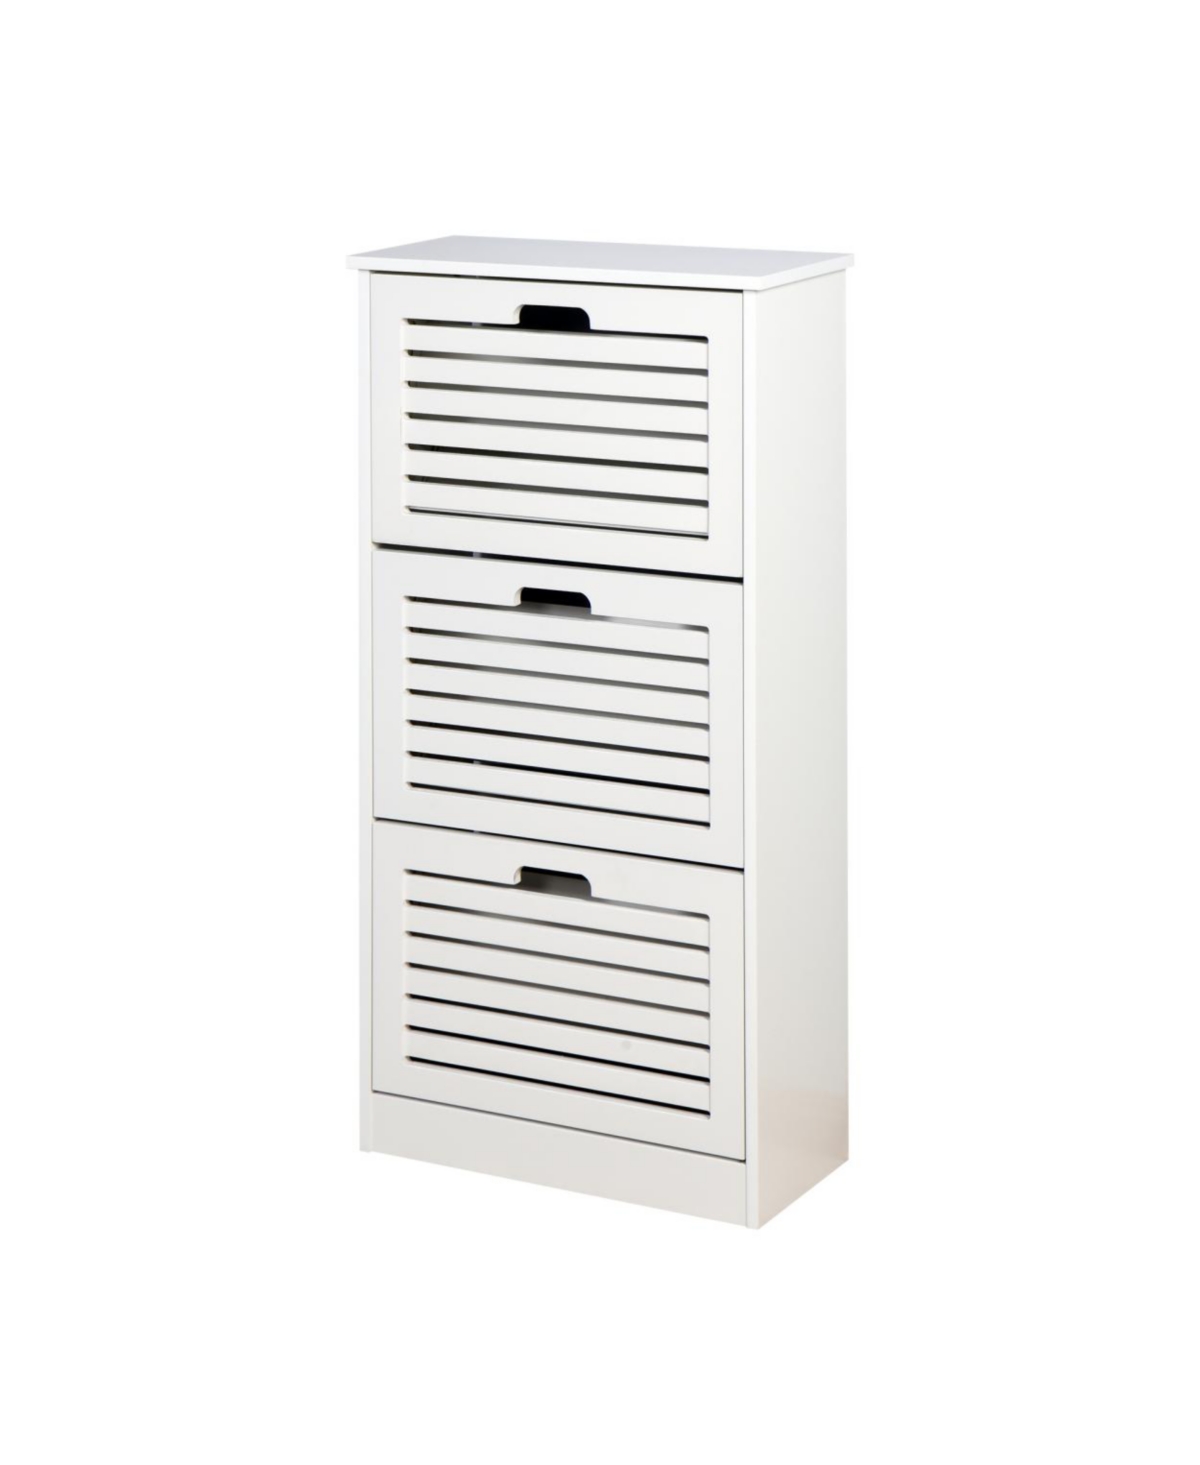 White Wooden Shoe Cabinet with 3 Flip Doors - White